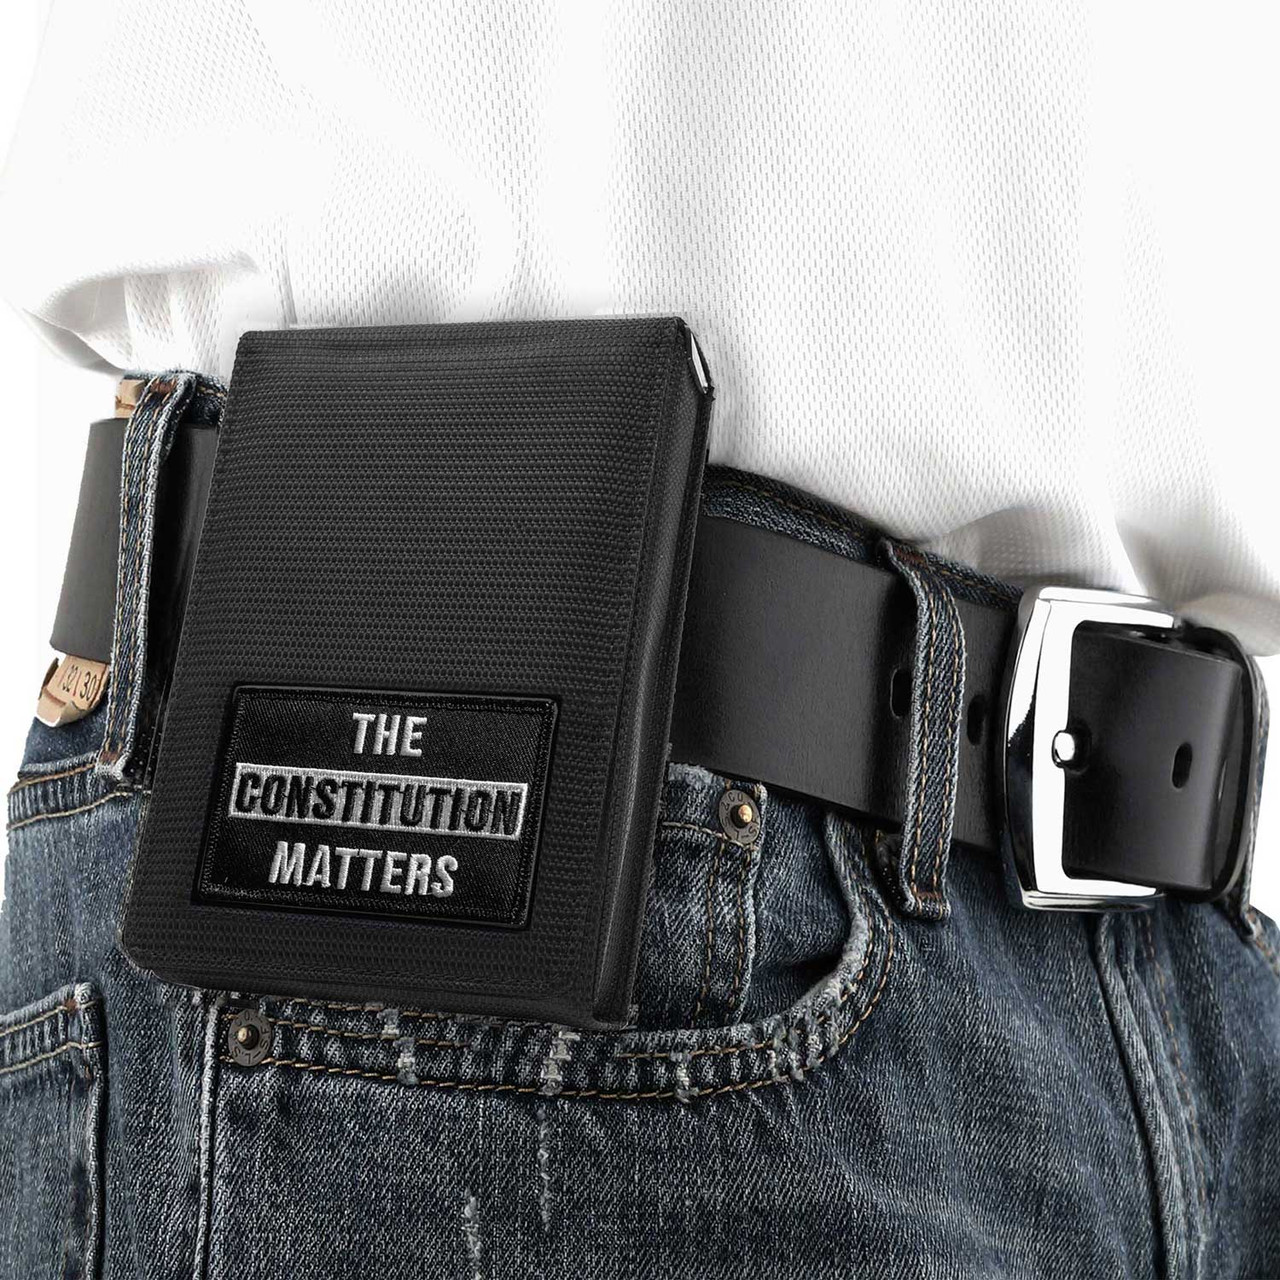 HK VP40 The Constitution Matters Holster